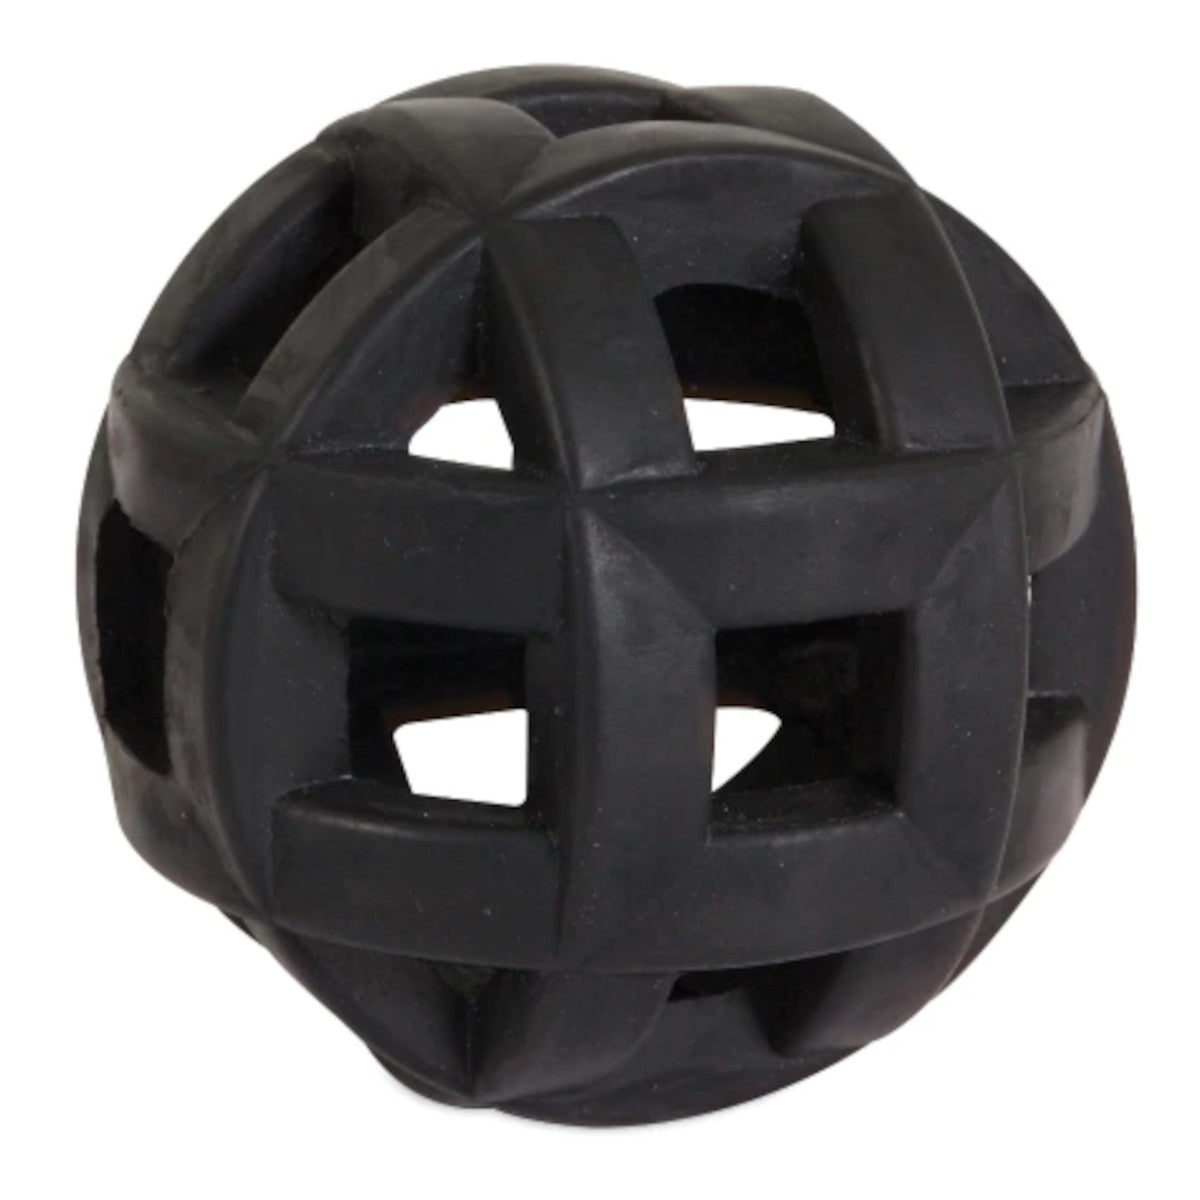 JW Hol-ee Roller X Black - Fun-Filled Do It All Puzzle Ball for Dogs.